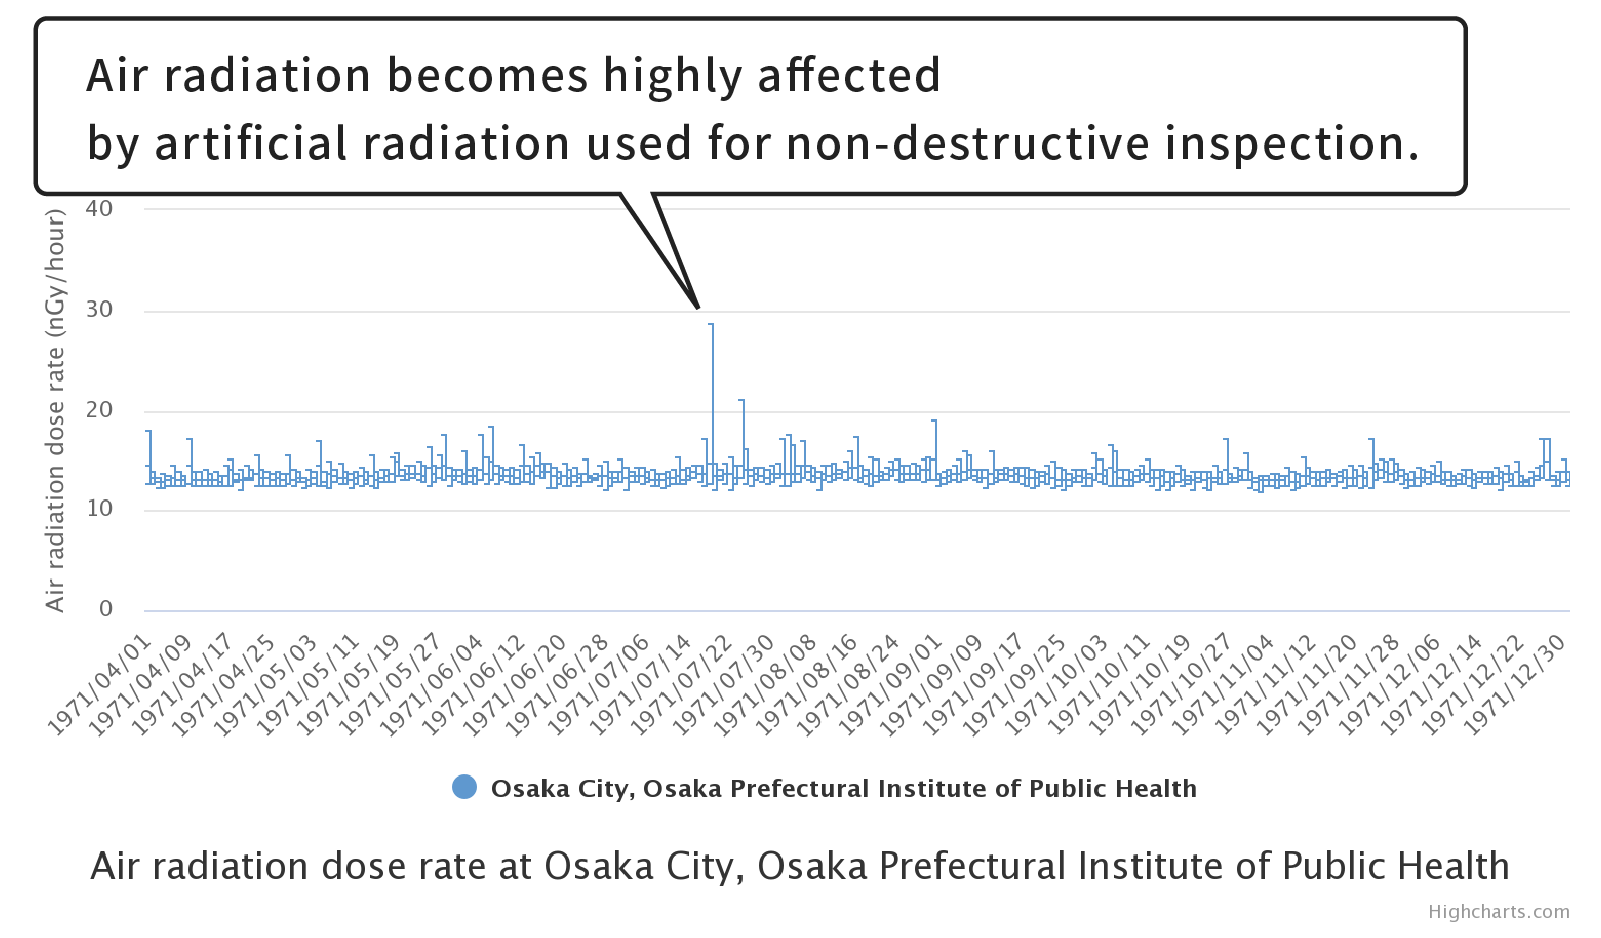 Air radiation dose rate at Osaka Prefectural Institute of Public Health in Osaka City